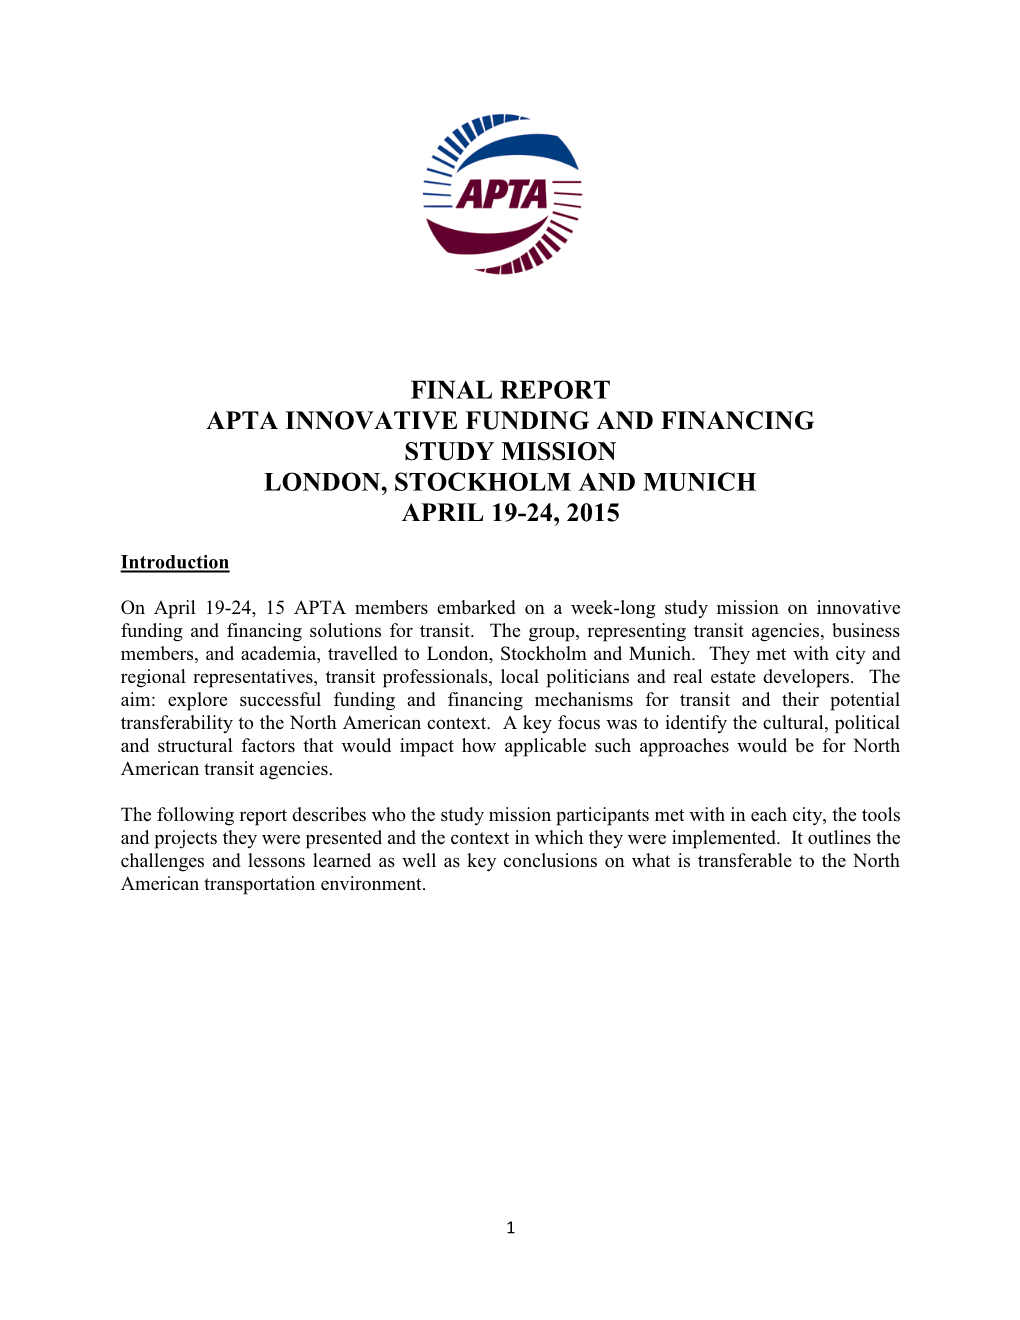 Final Report Apta Innovative Funding and Financing Study Mission London, Stockholm and Munich April 19-24, 2015